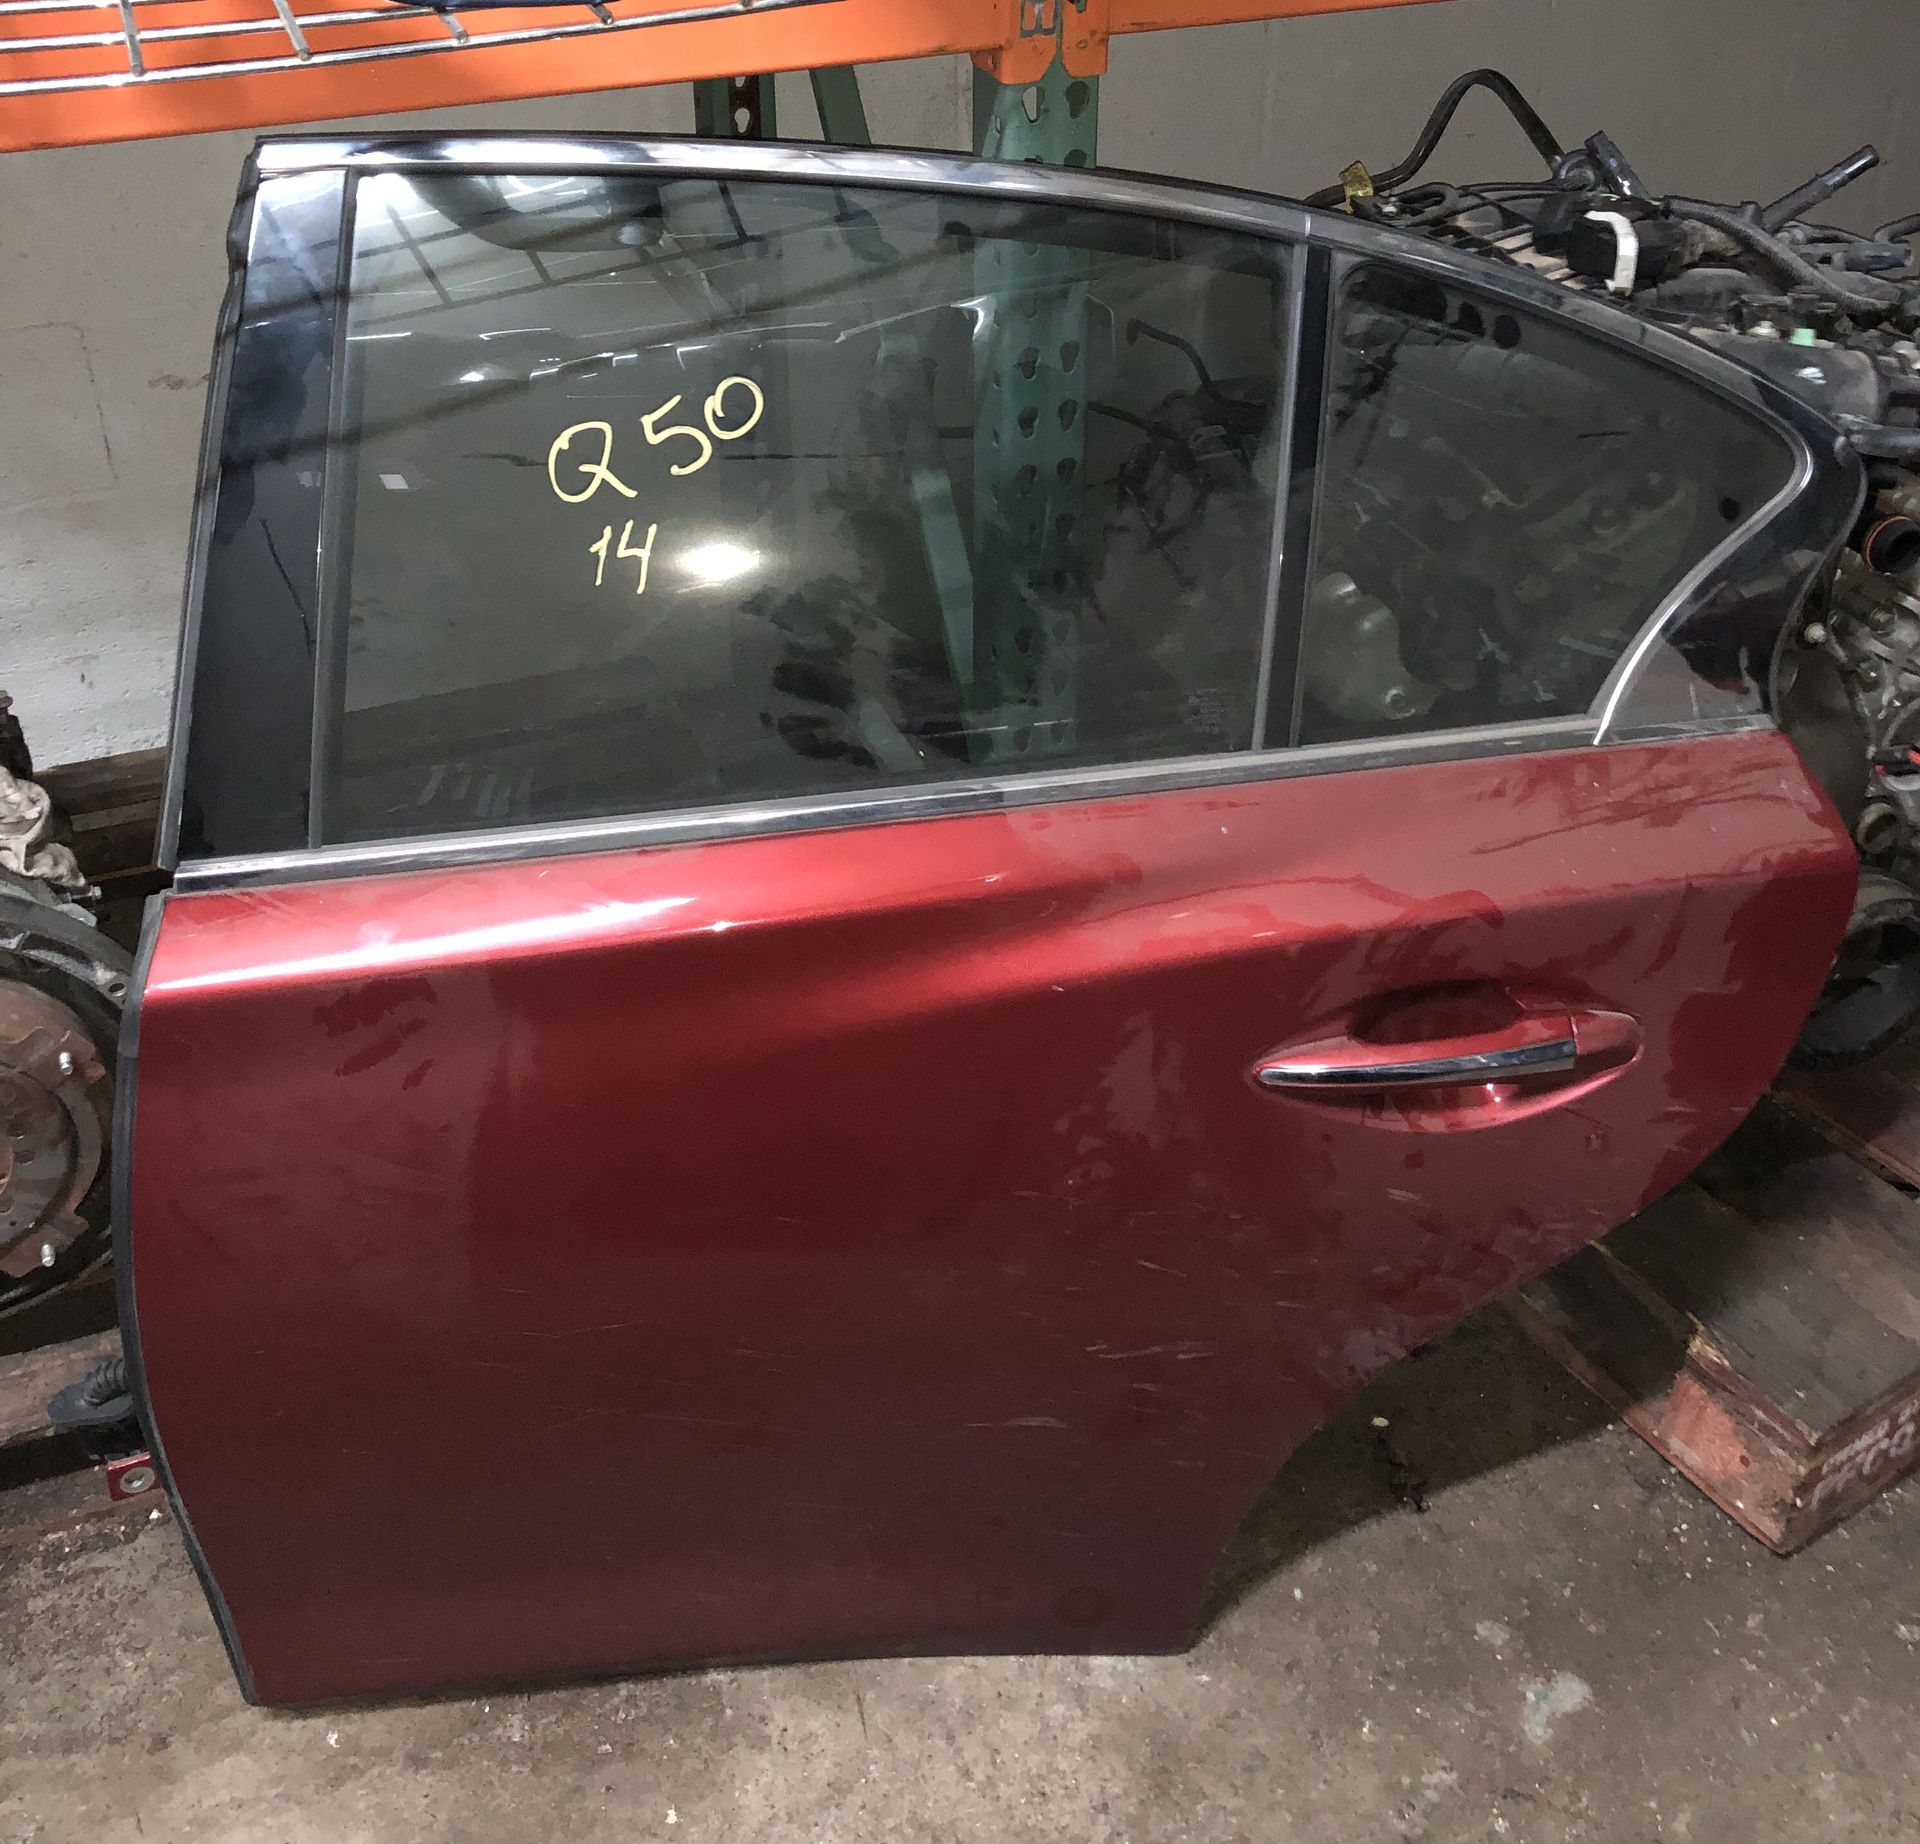 Infiniti q50 parts parting out front rear door left right doors seats engine transmission